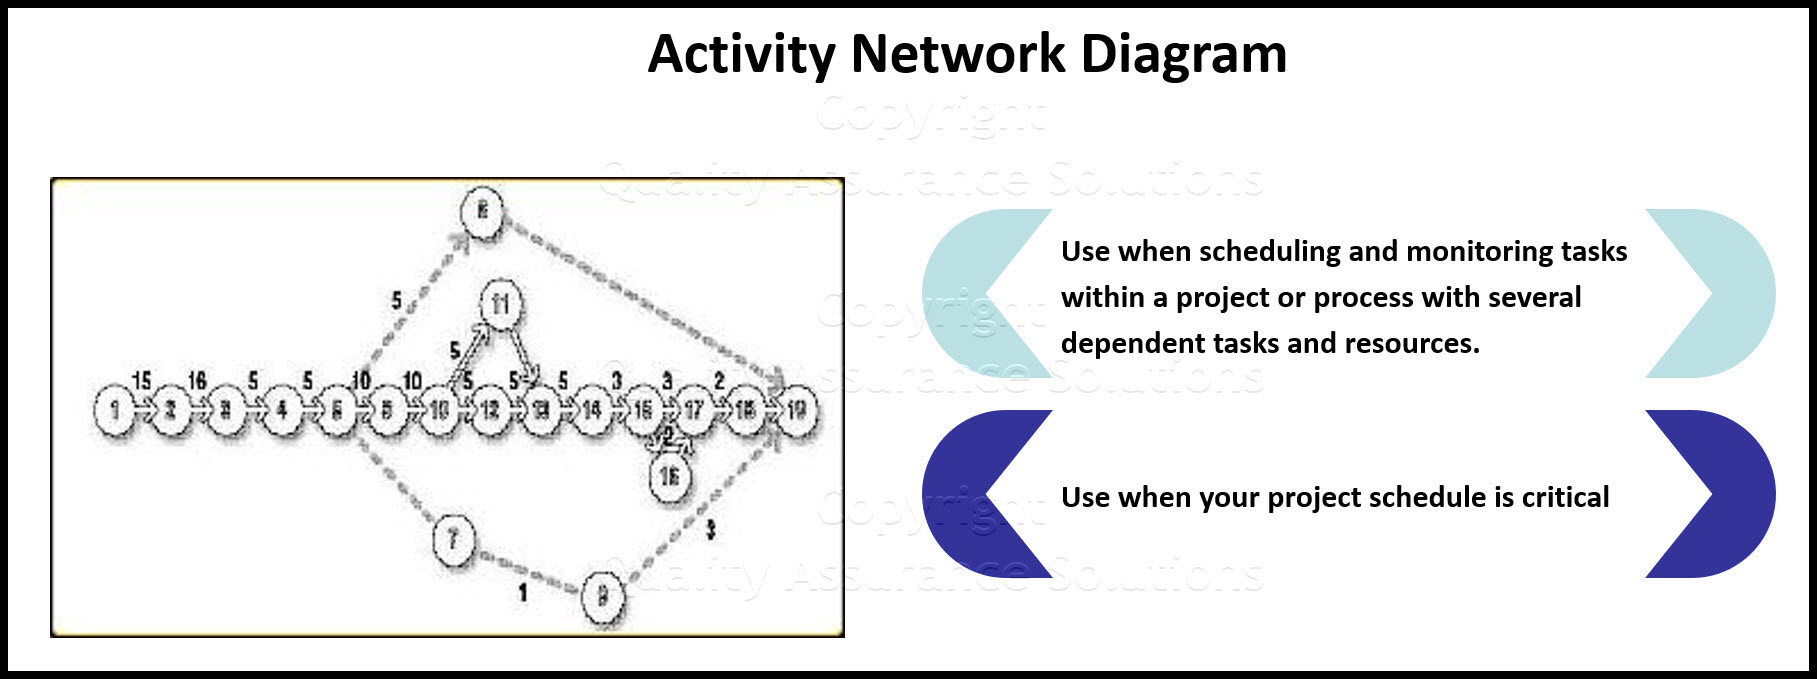 The what, when, how and why of Activity Network Diagram